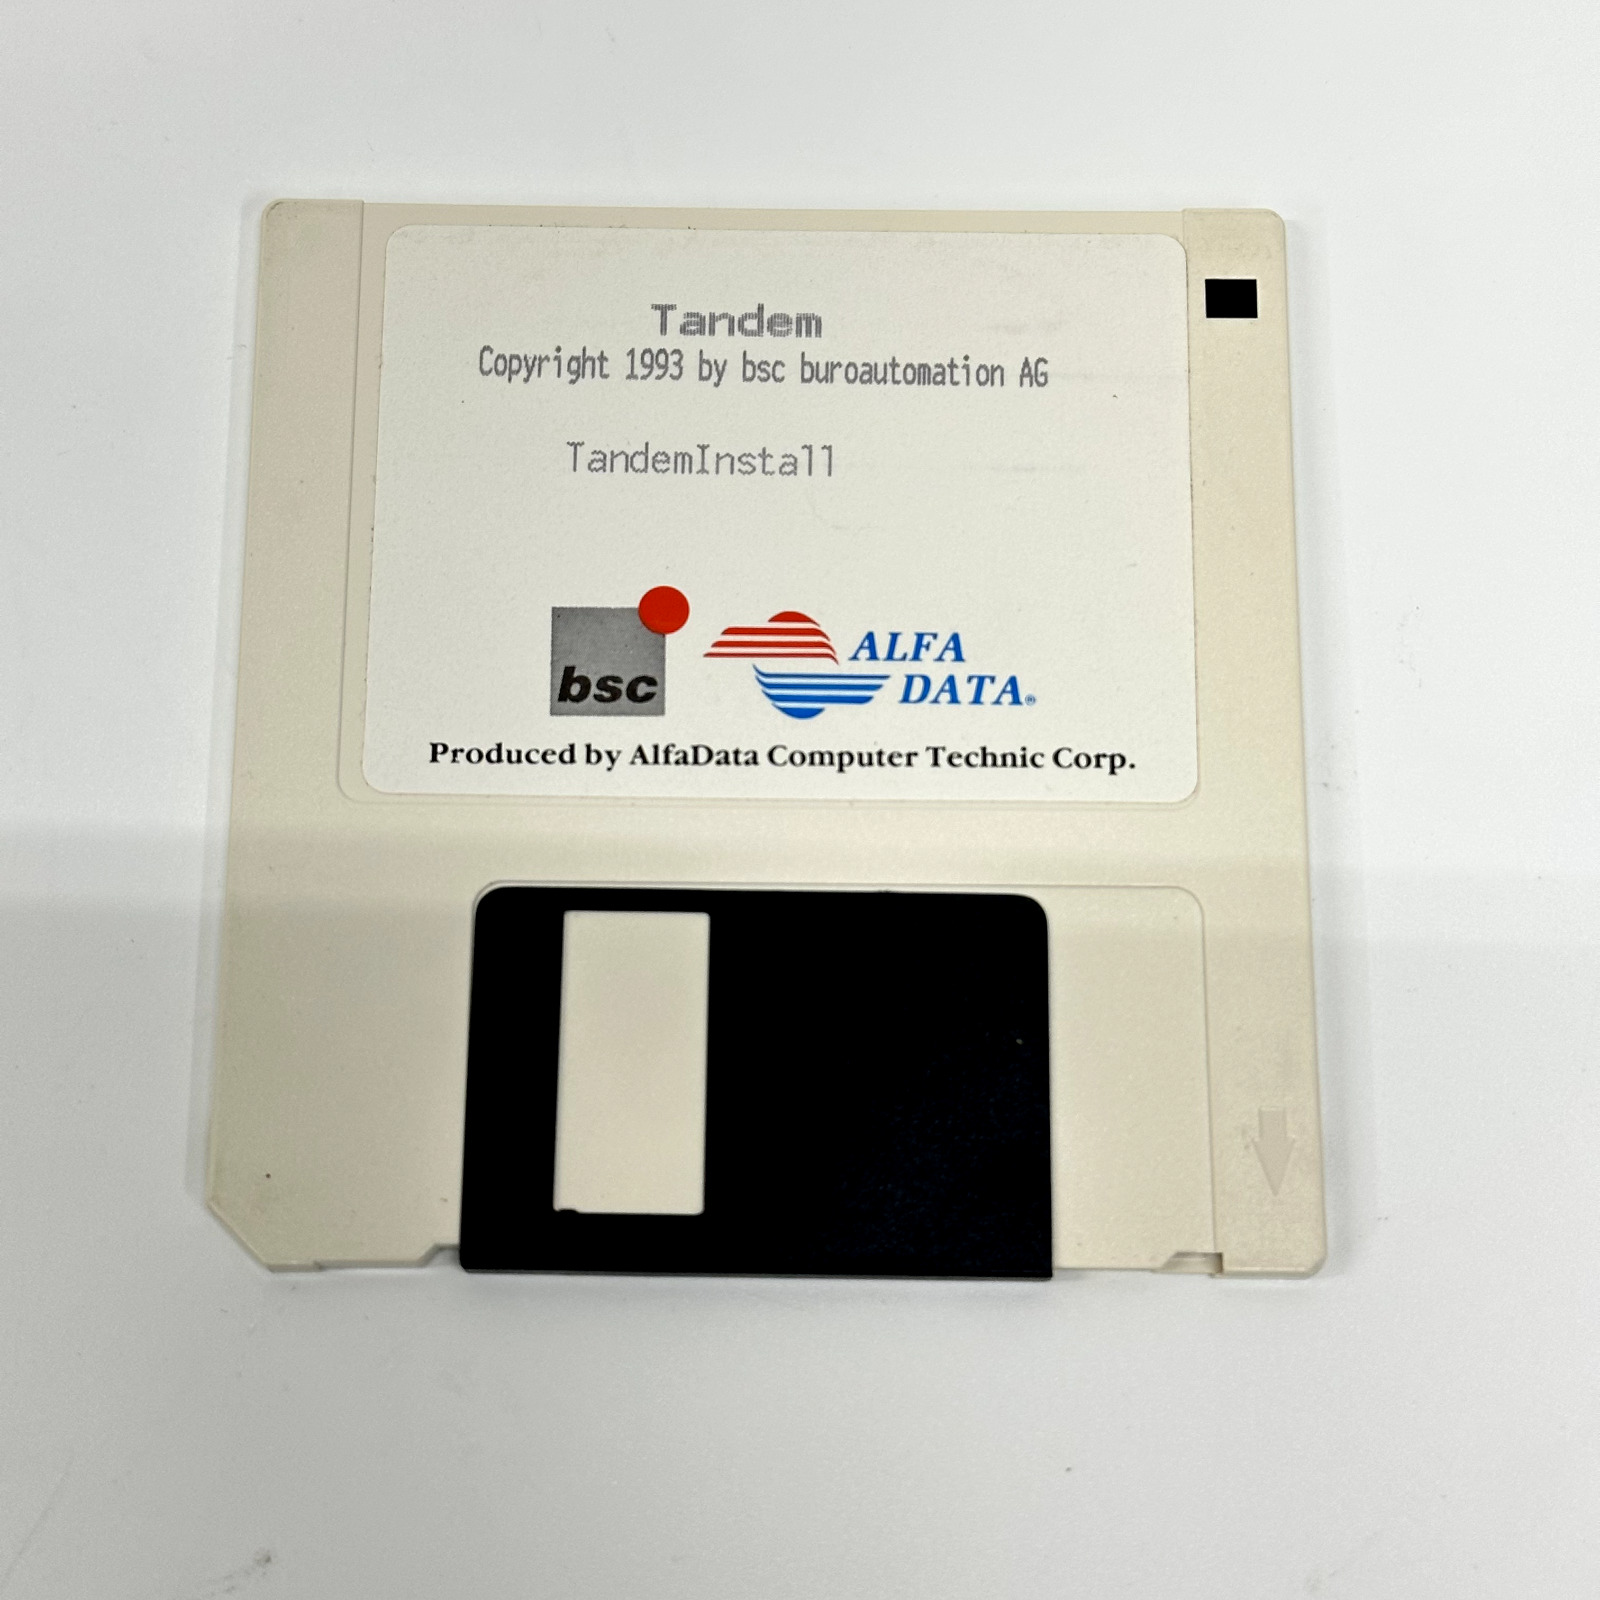 Commodore Amiga BSC Tandem Install on Floppy Disk Buroautomation AG